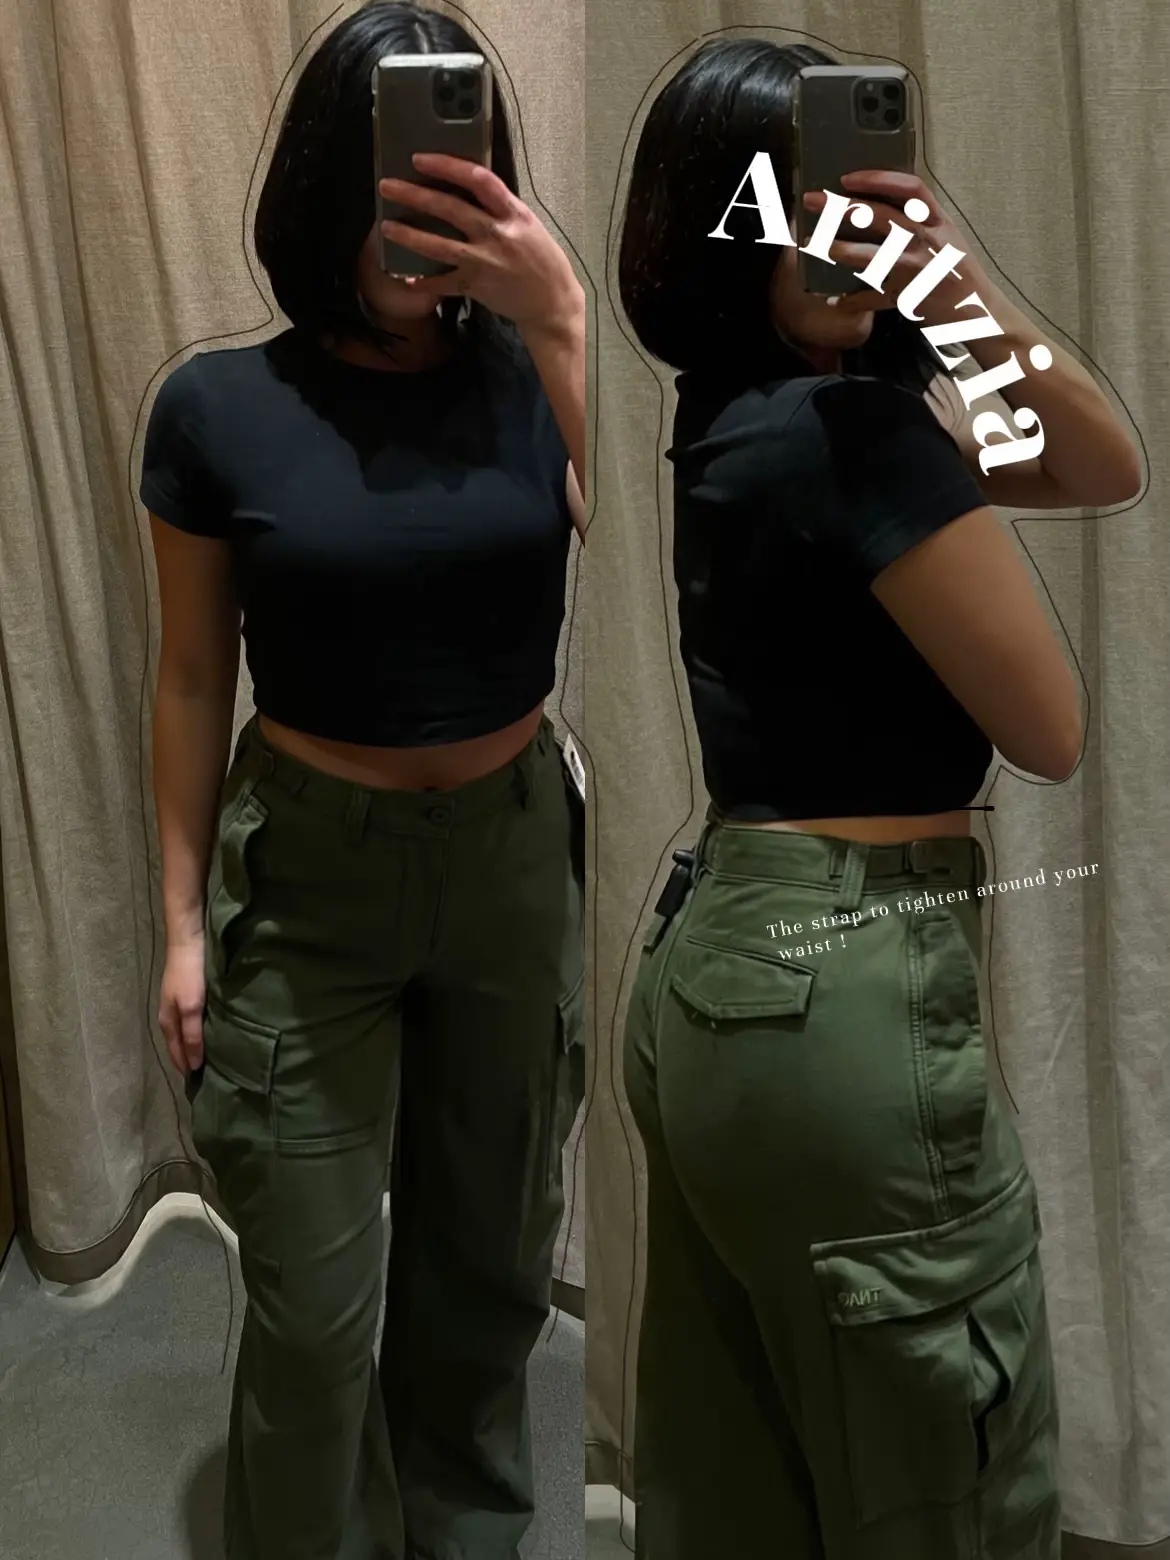 Command Pant and Contour Bodysuit are amazing! Which color pants